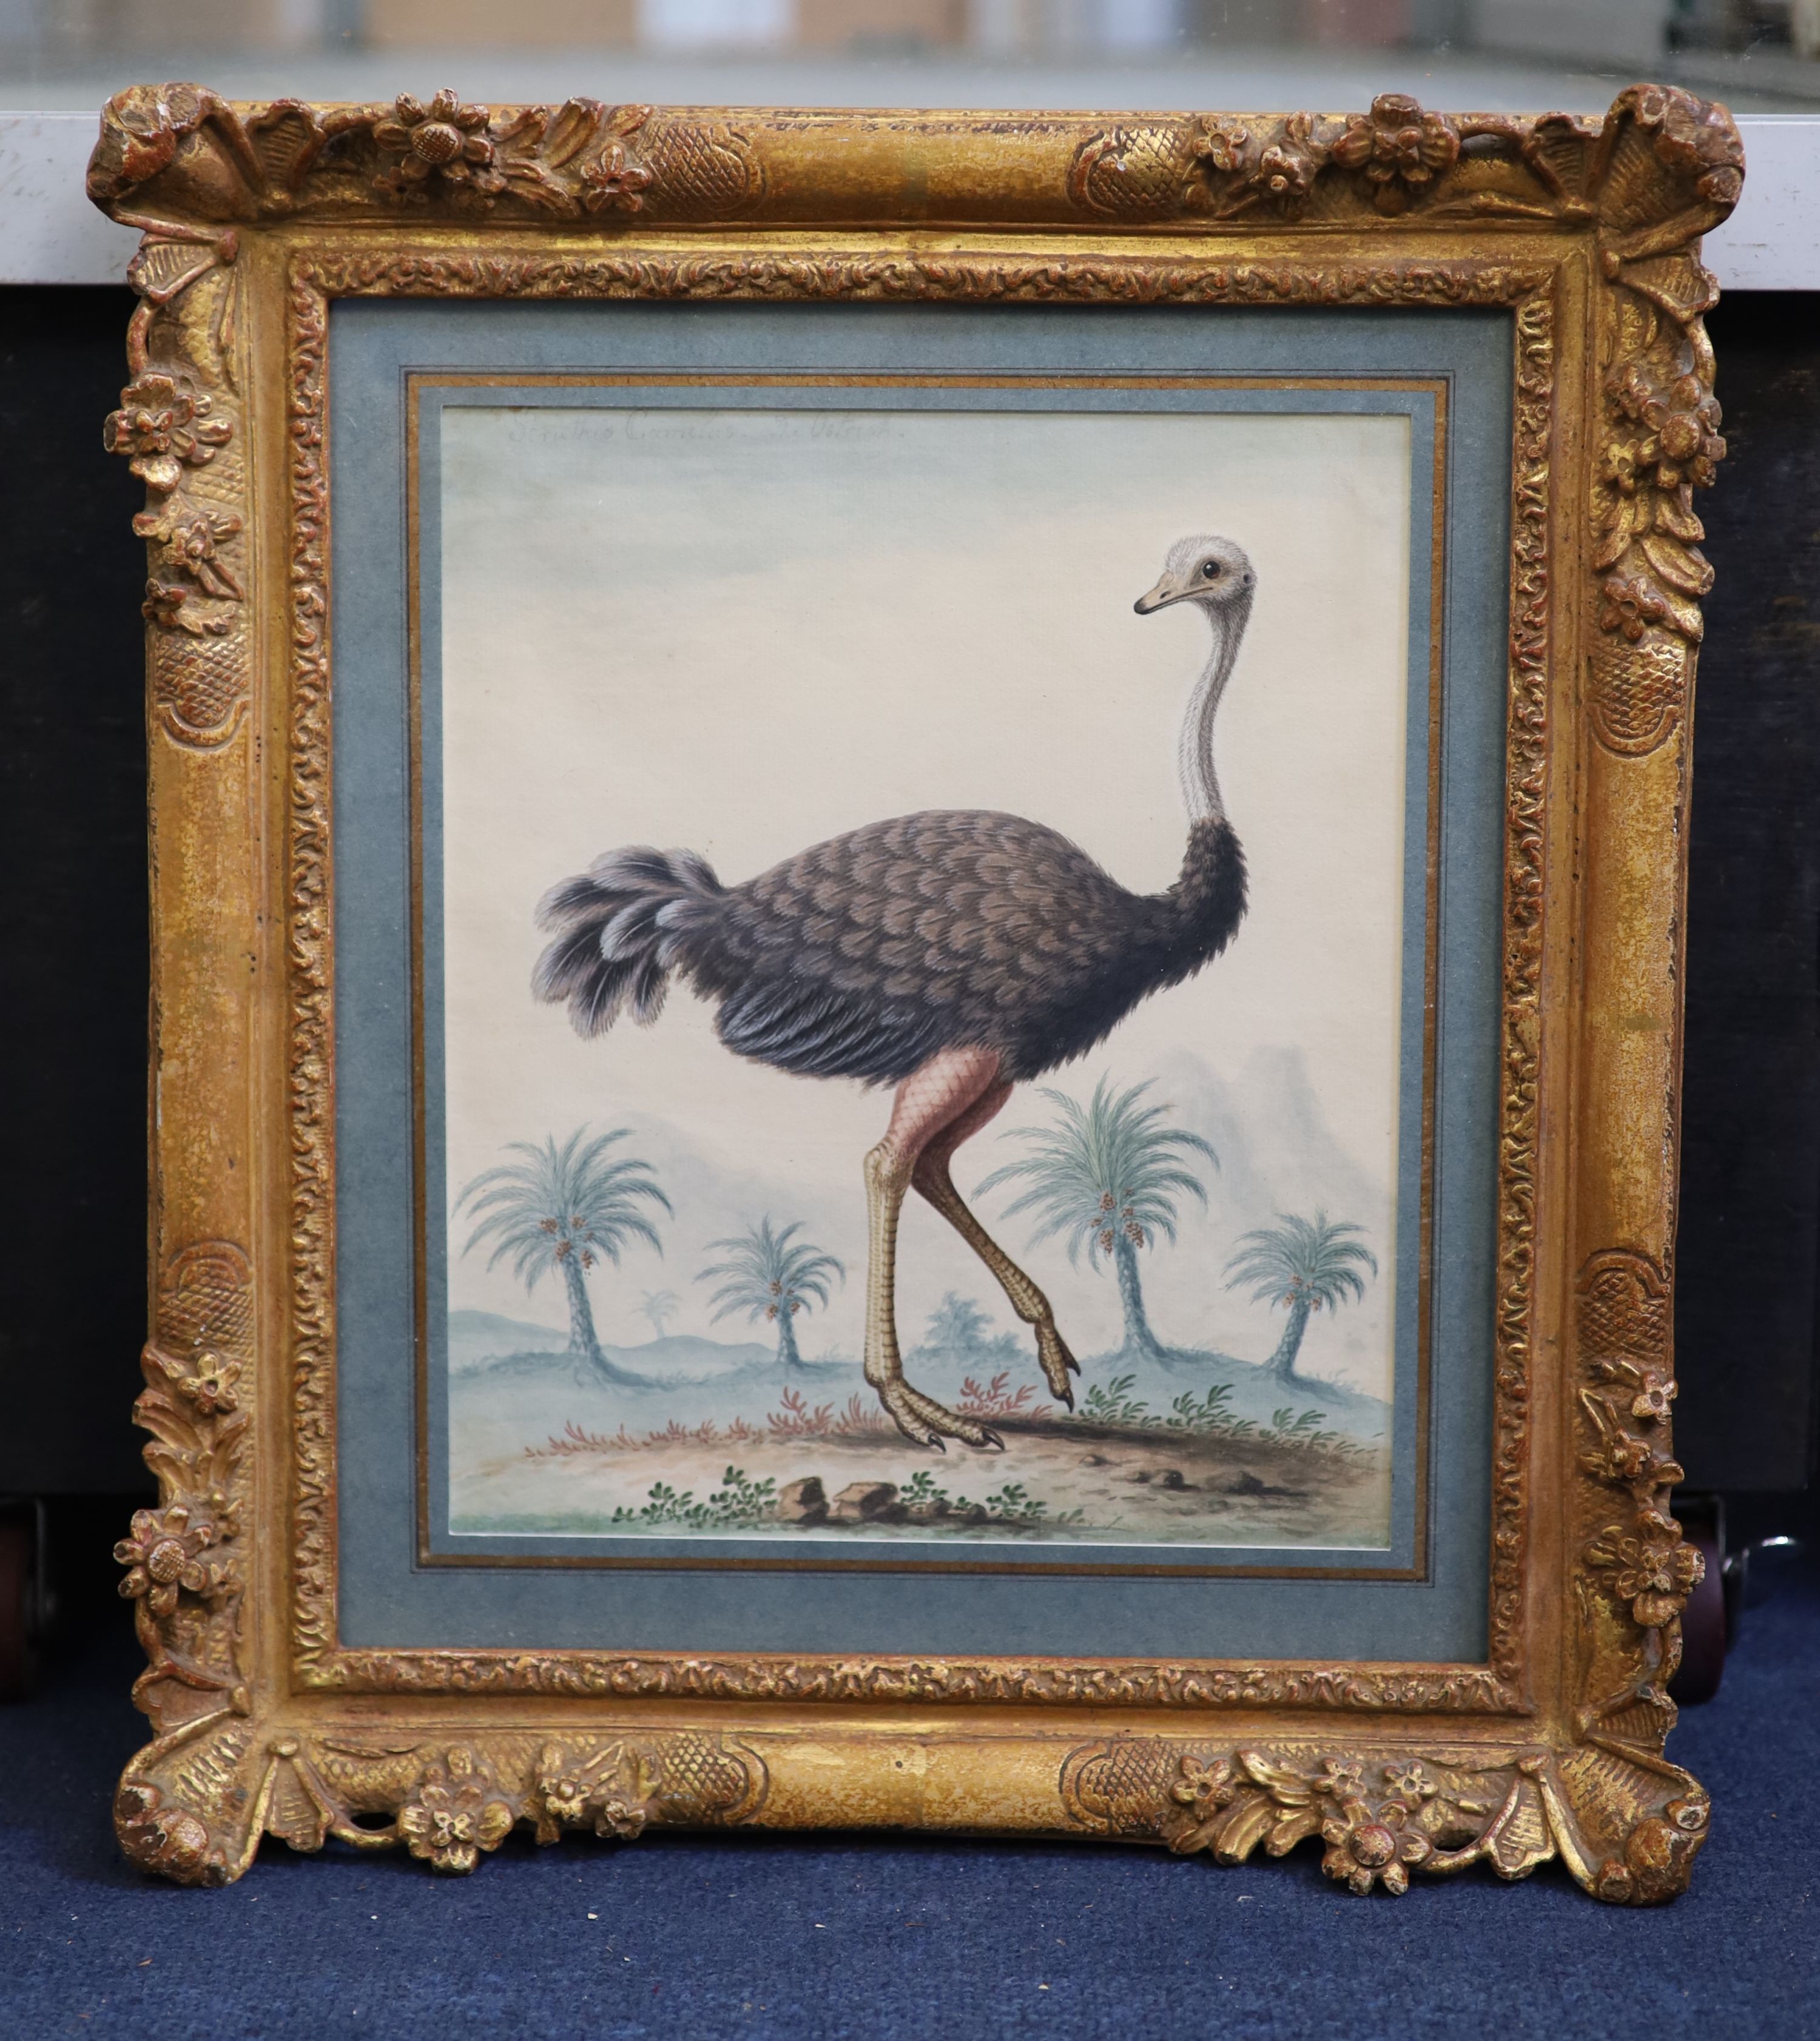 George Edwards (1694-1773), 'Struthia Camelus, The Ostrich' c.1740-45, watercolour on paper, 27 x 22.5cm